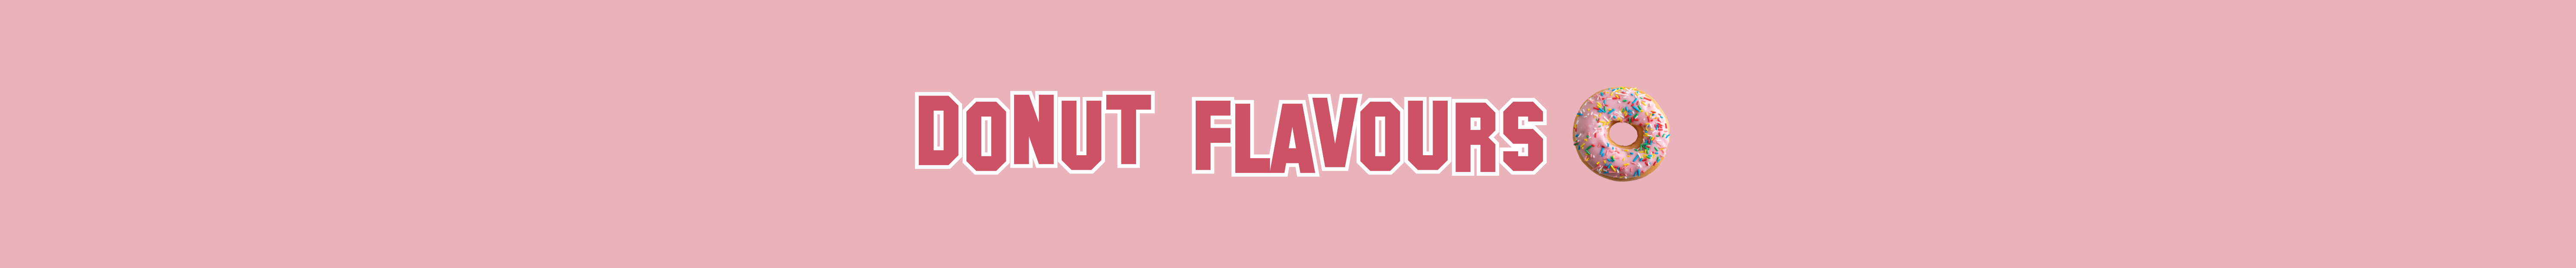 Donuts Flavours